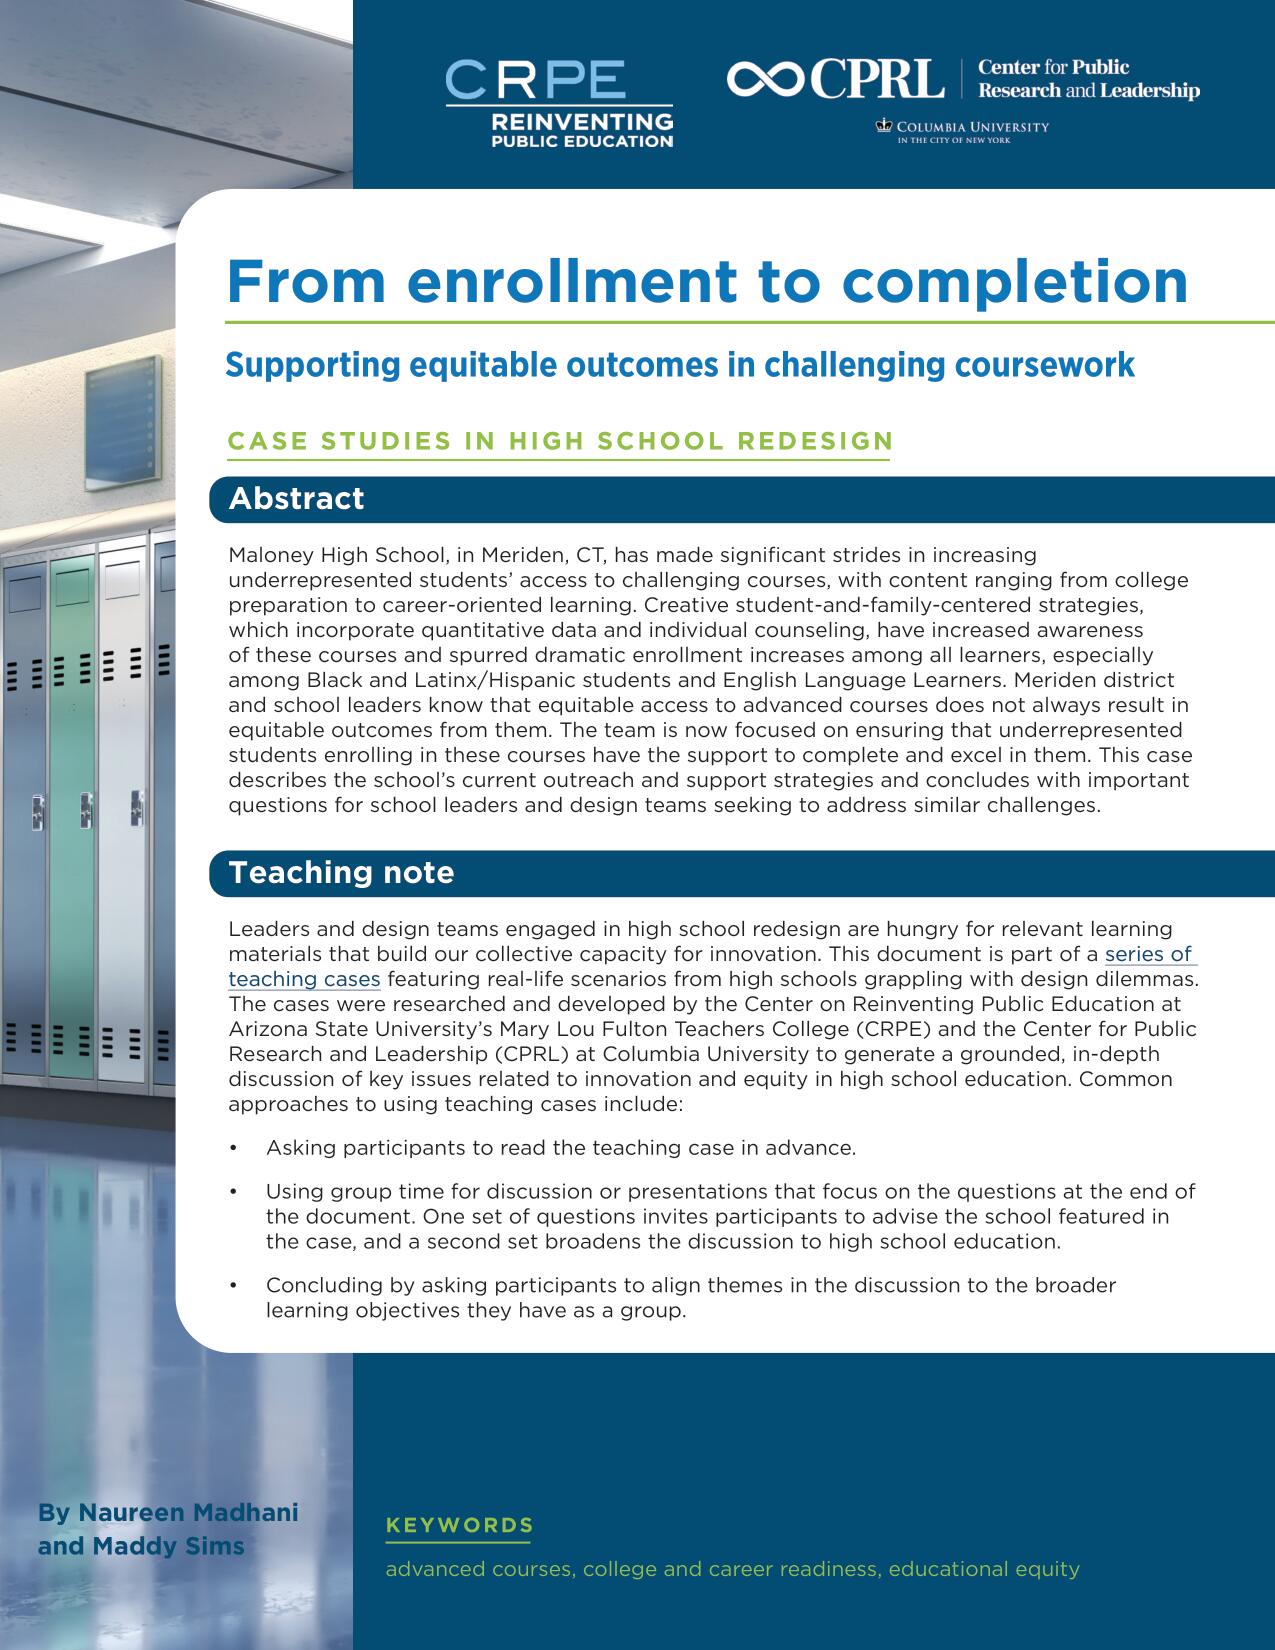 Cover image of teaching case called "From enrollment to completion"